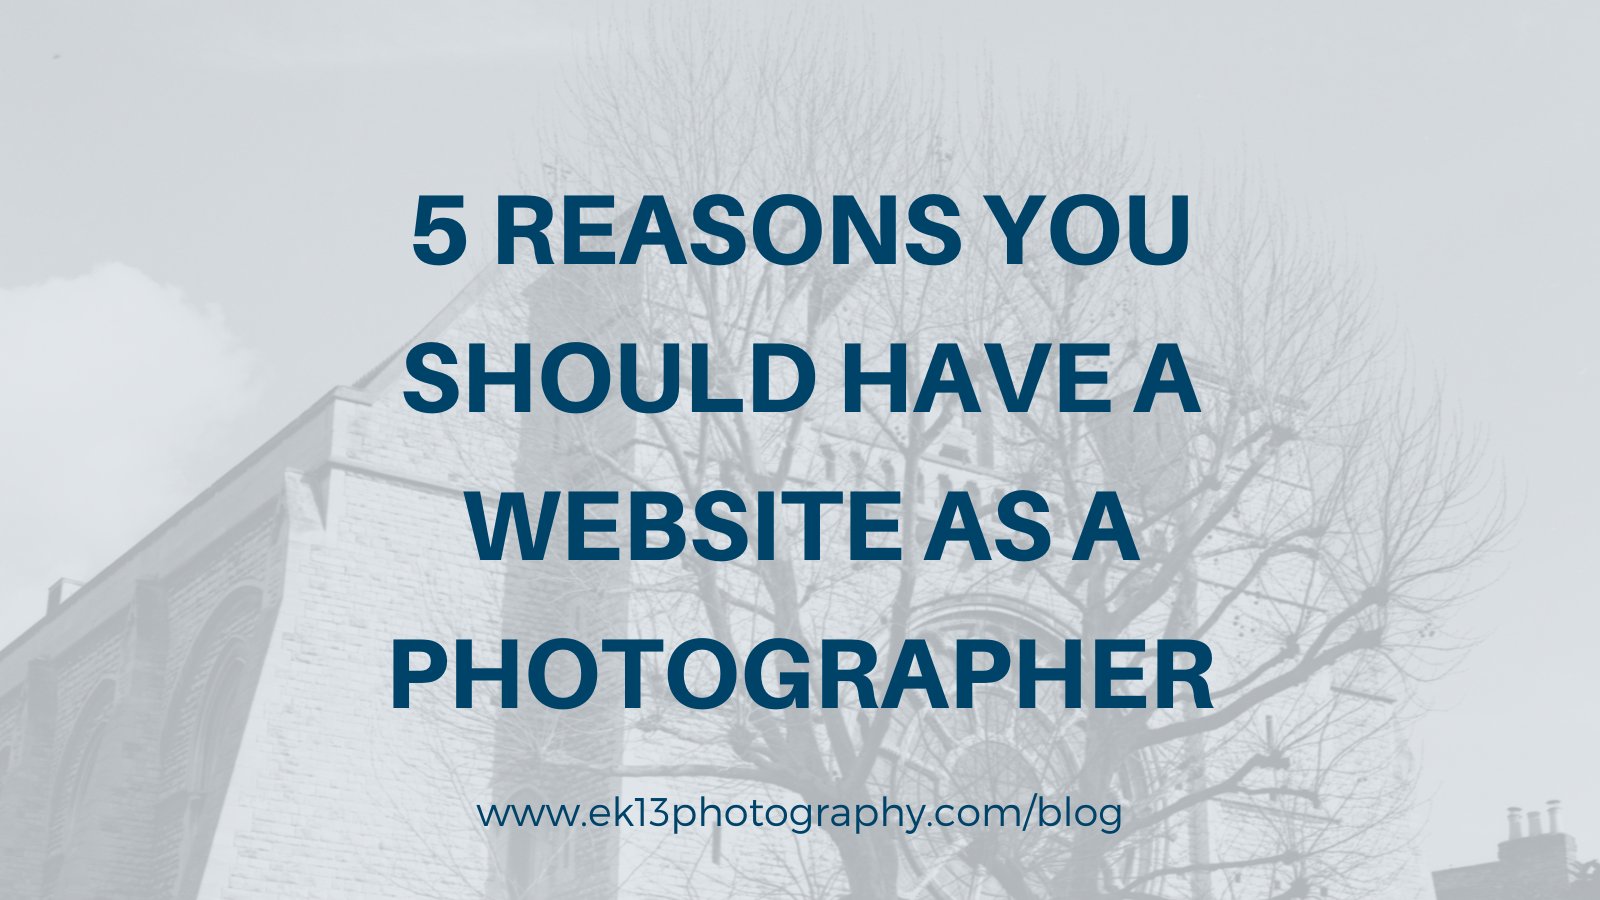 5 Reasons You Should Have A Website As A Photographer